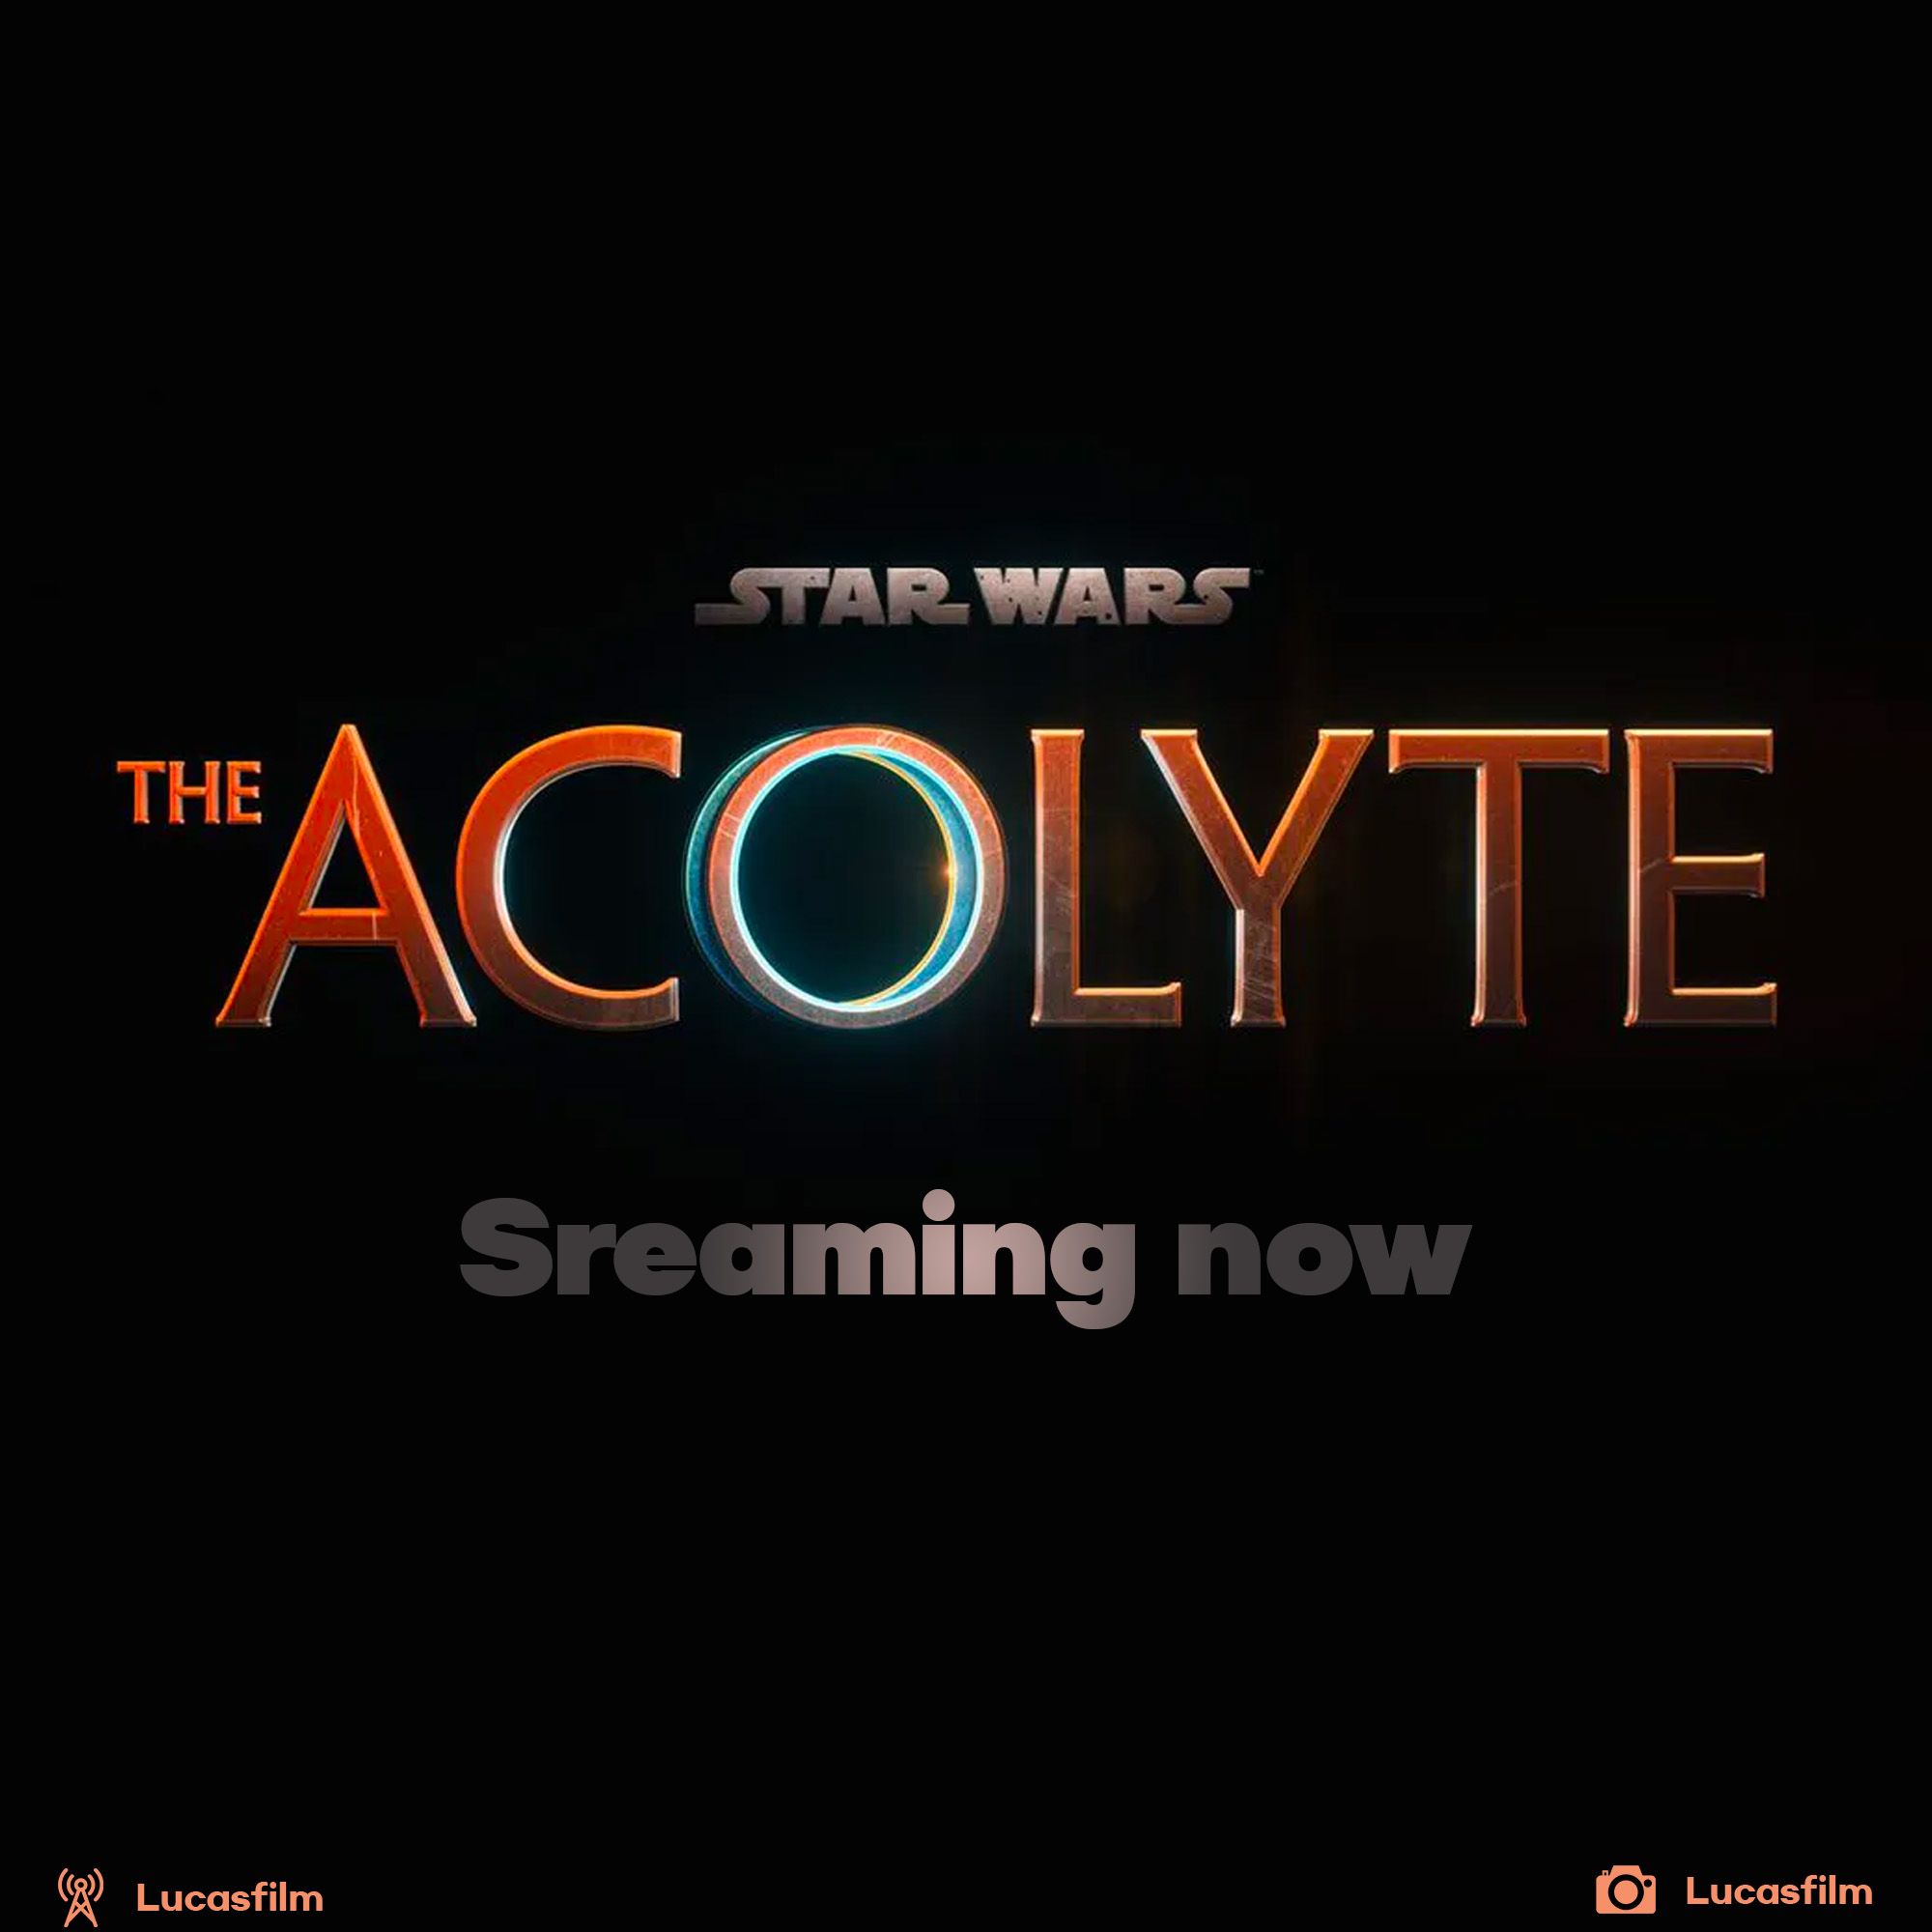 Star Wars The Acolyte streaming now